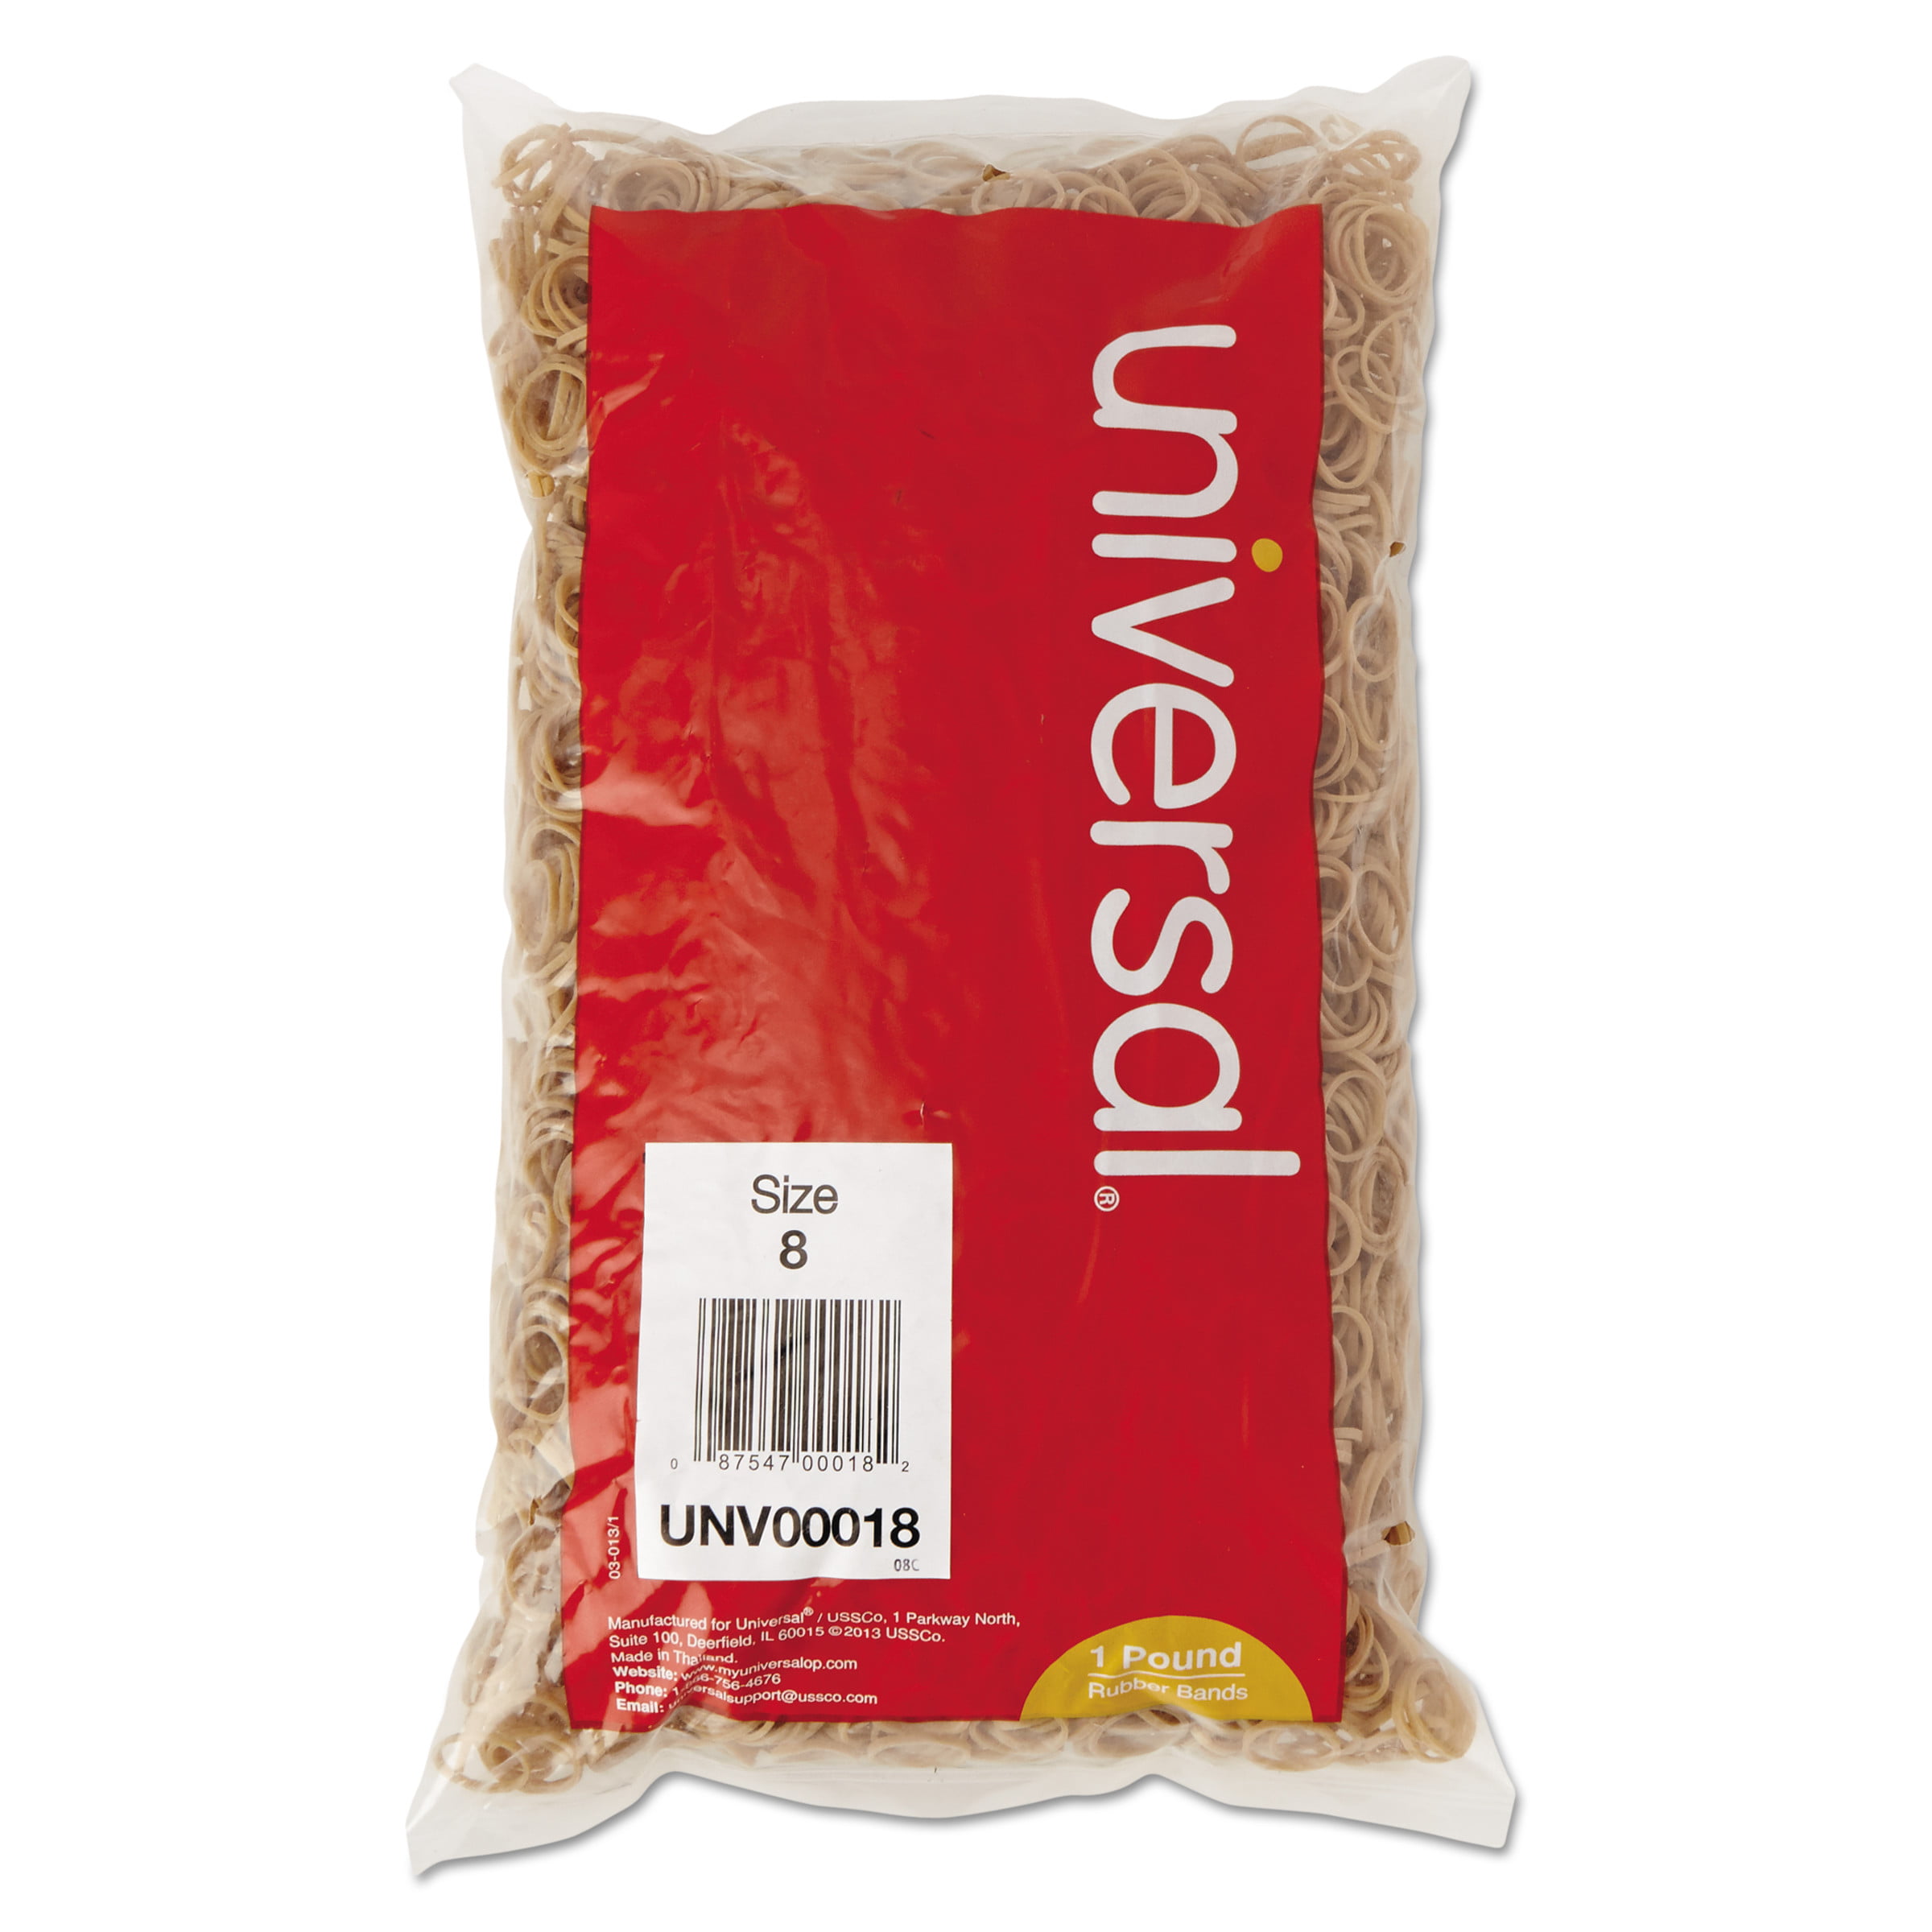 Universal Rubber Bands 1lb Pack Size 16 